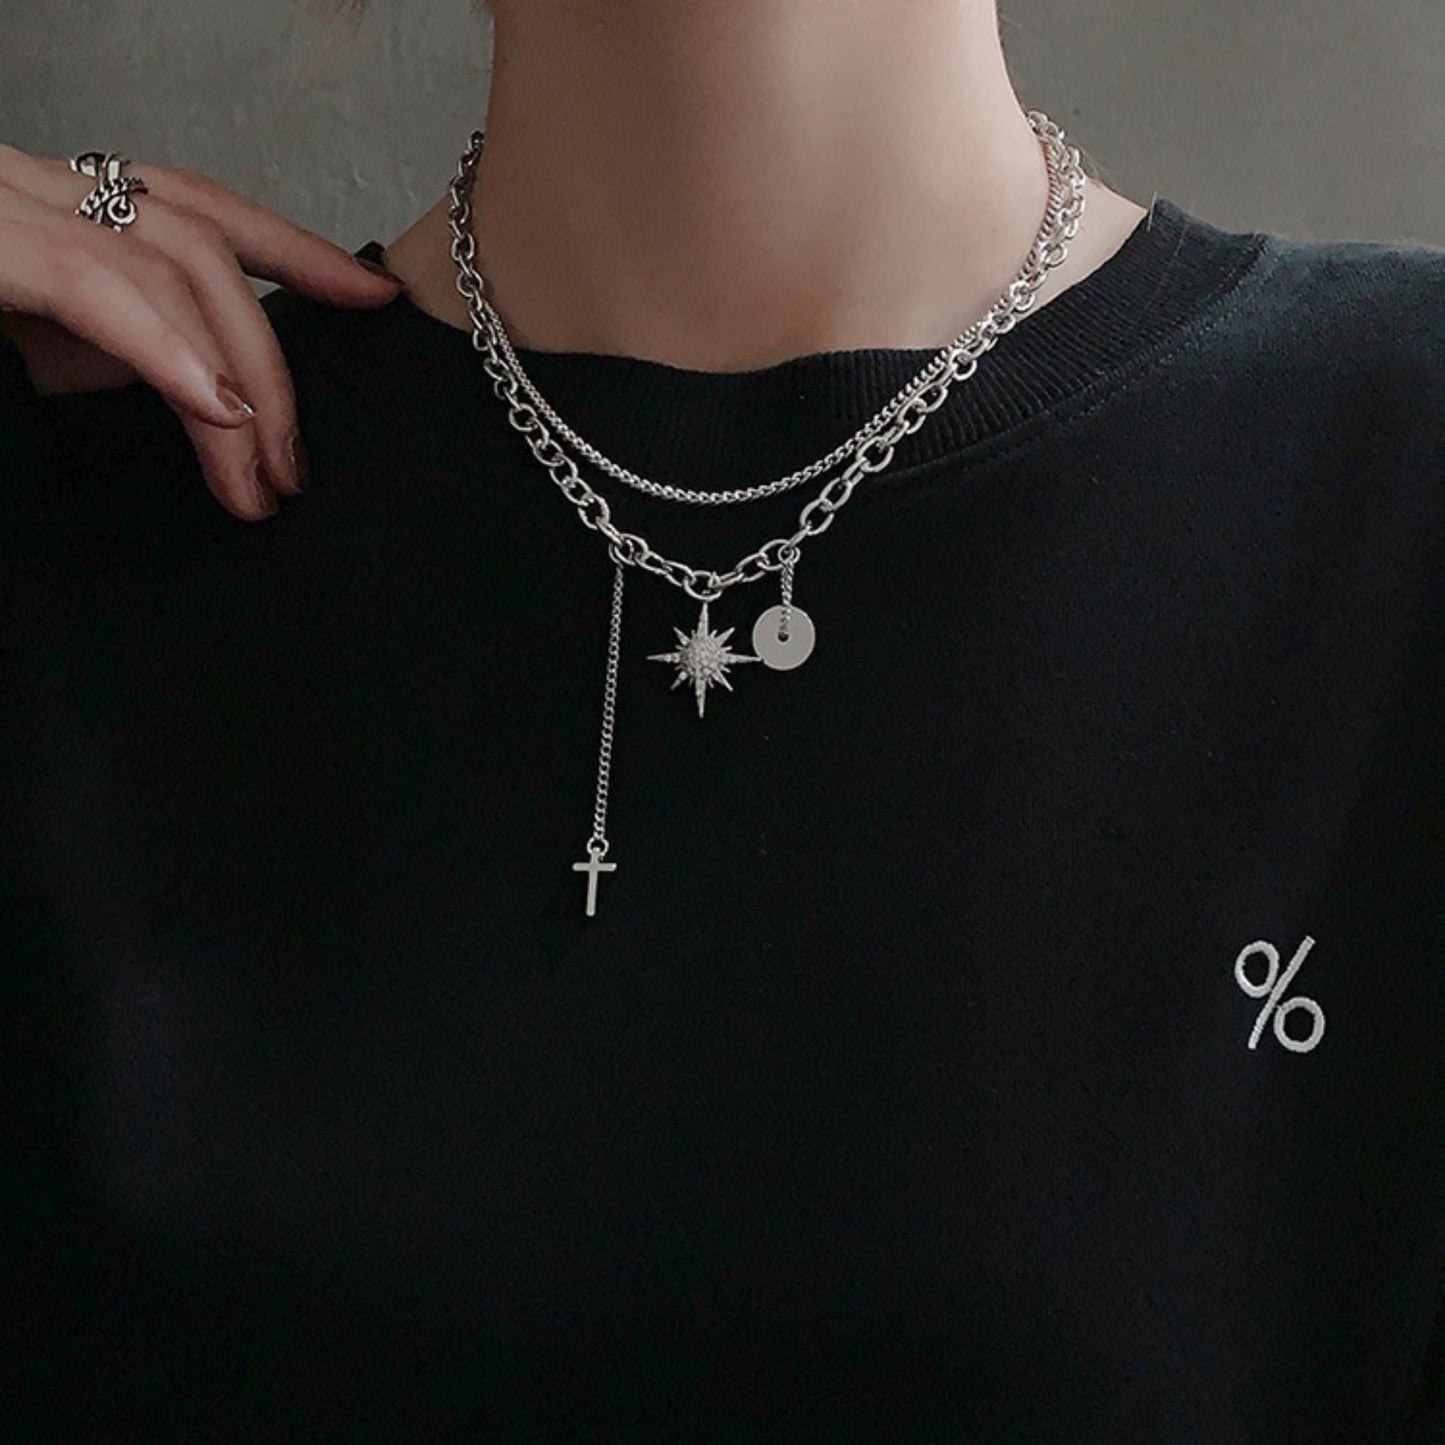 K-pop BTS style necklace choker, Double layer silver chain necklace, Gothic Dark style punk necklace, North star choker with charm, Unisex